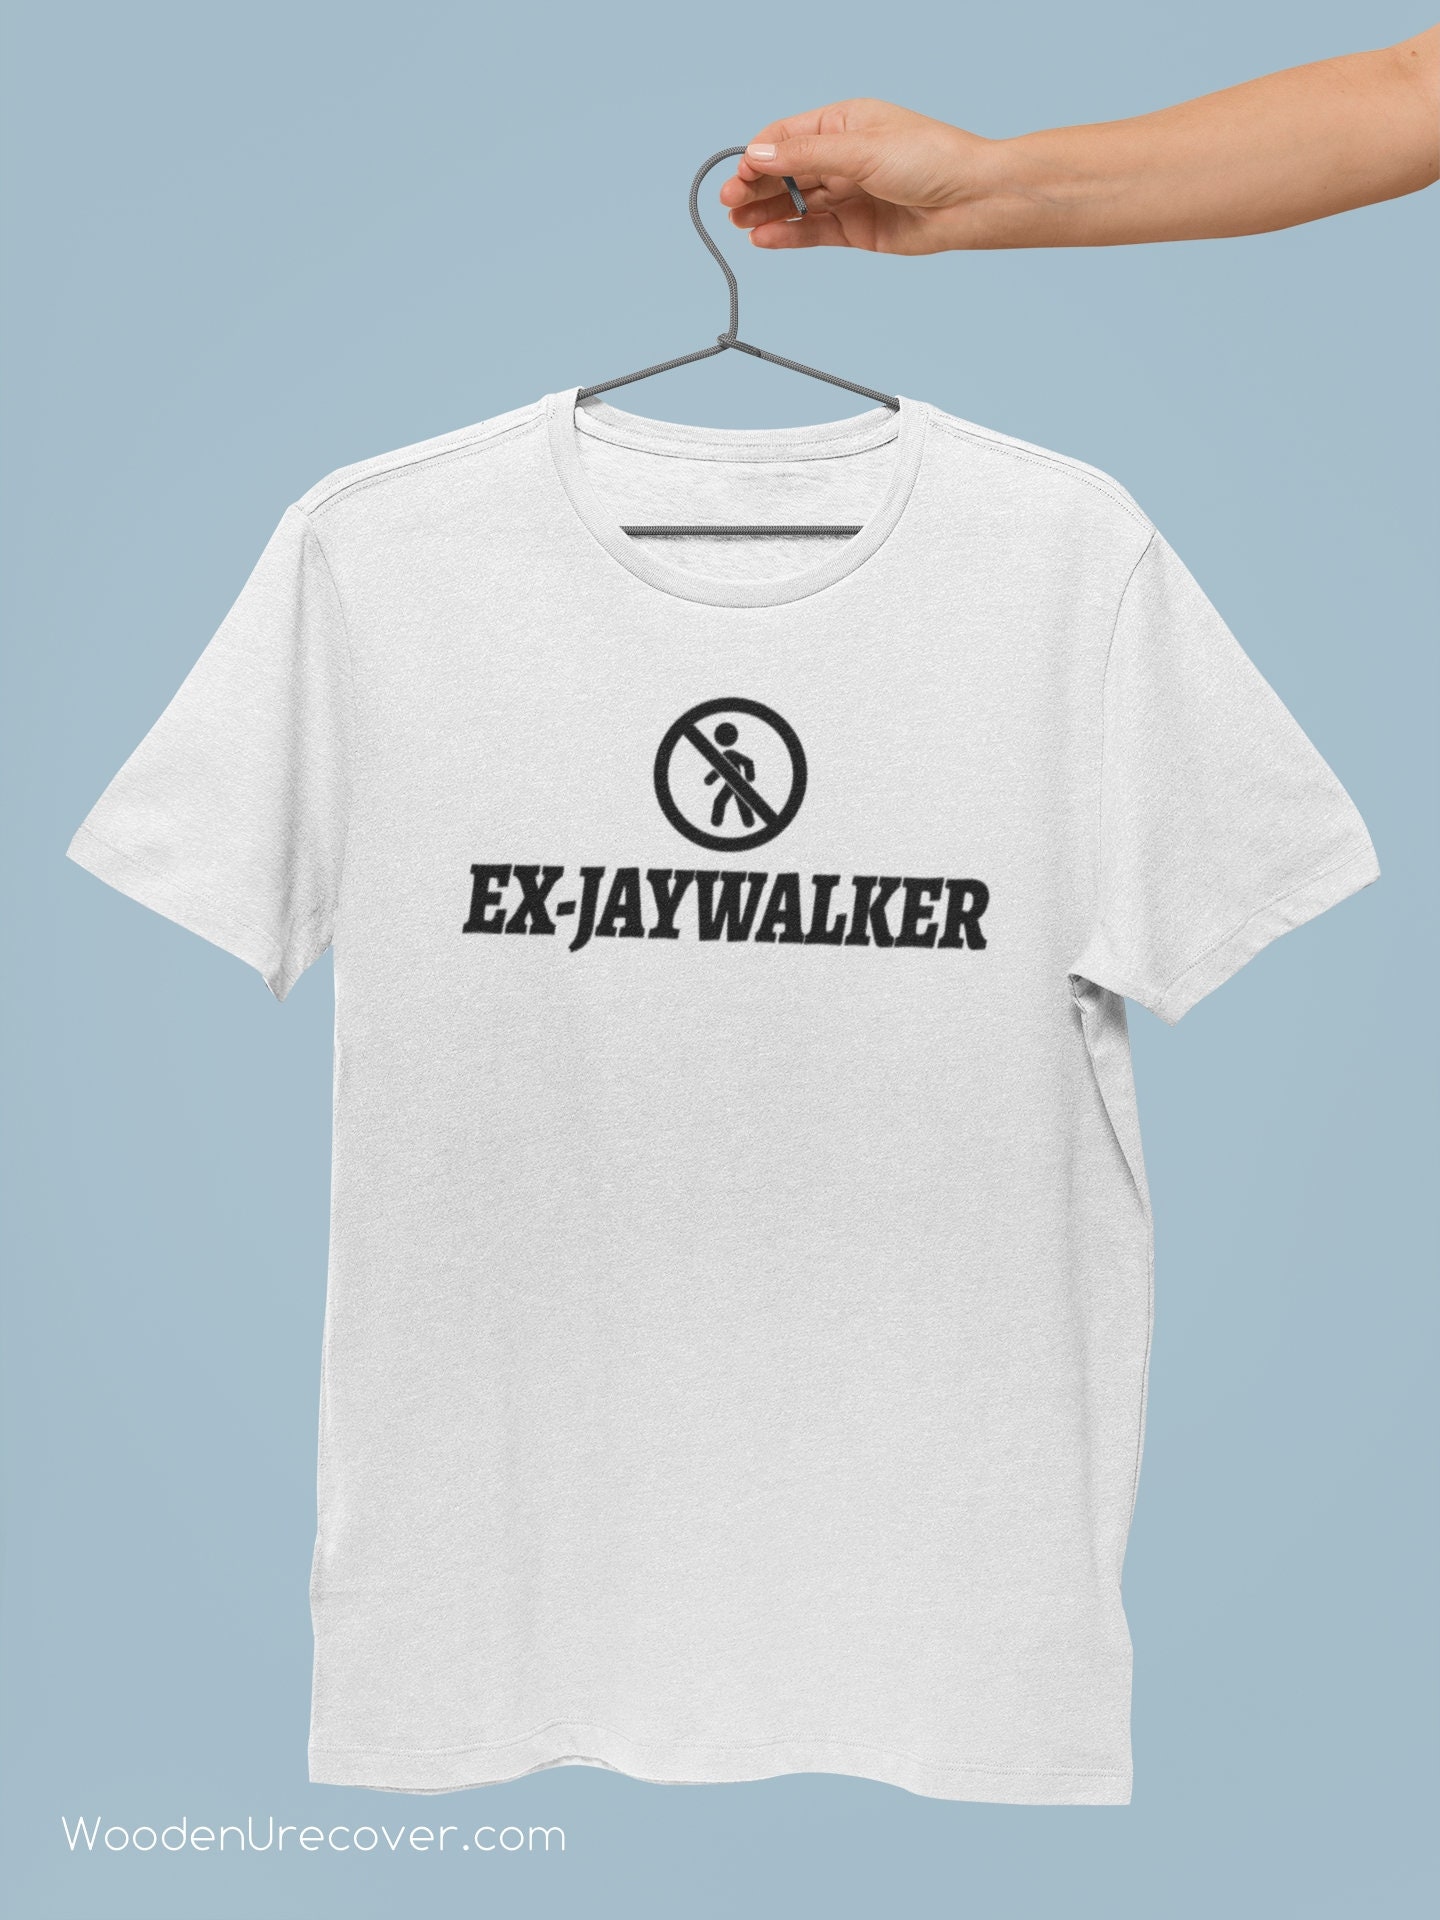 Ex-jaywalker 12 Step Recovery T-shirts for Men and Women in